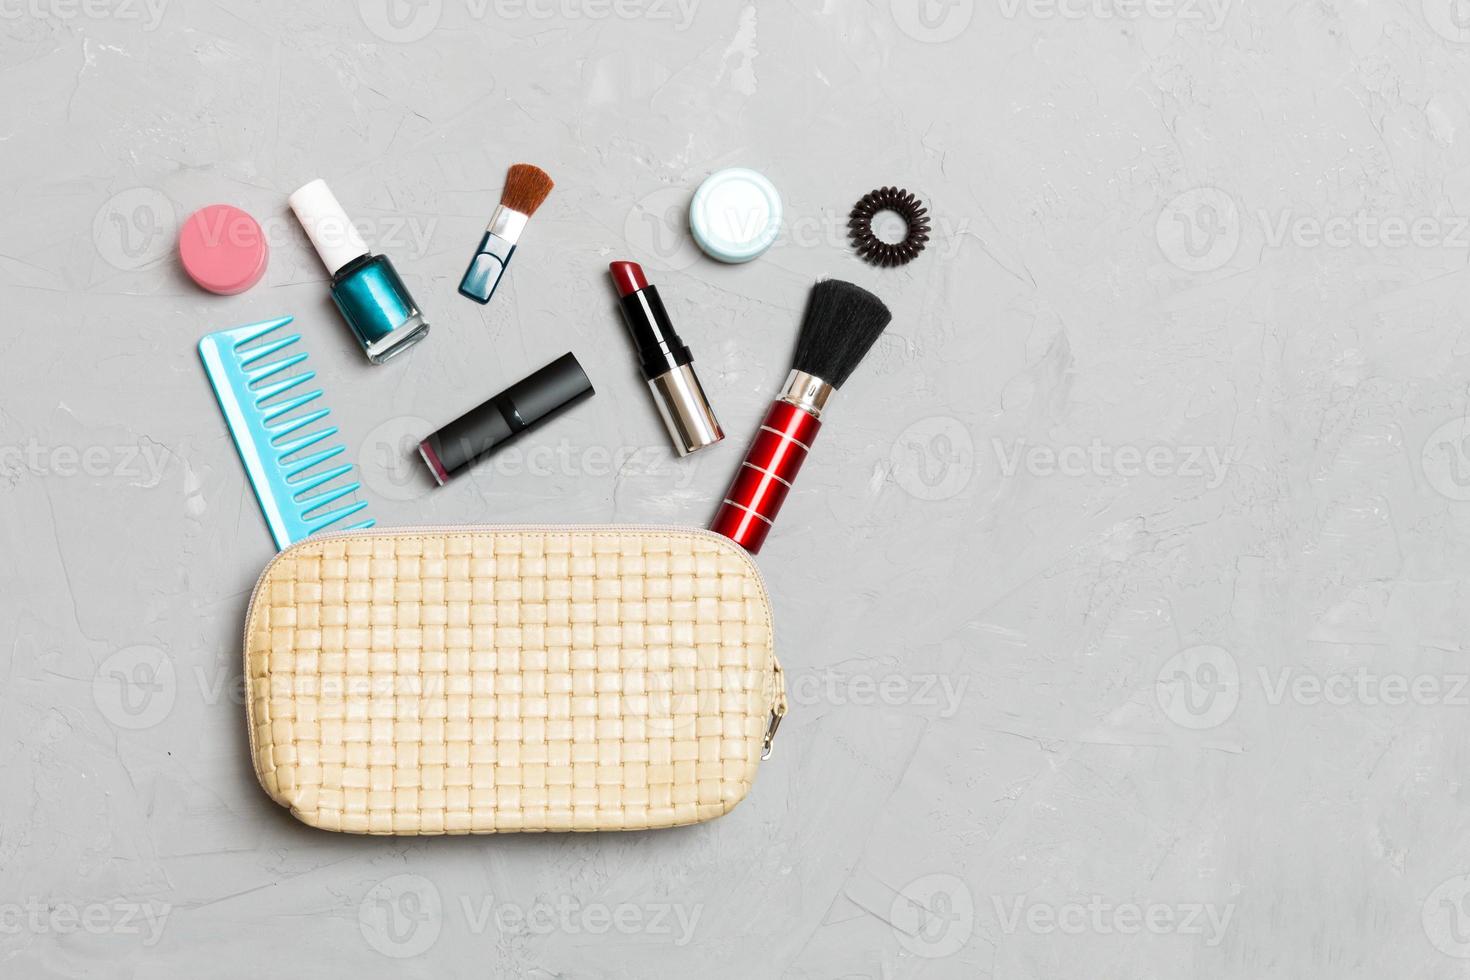 Top view of set of make up and skin care products spilling out of cosmetics bag on cement background. Beauty concept photo